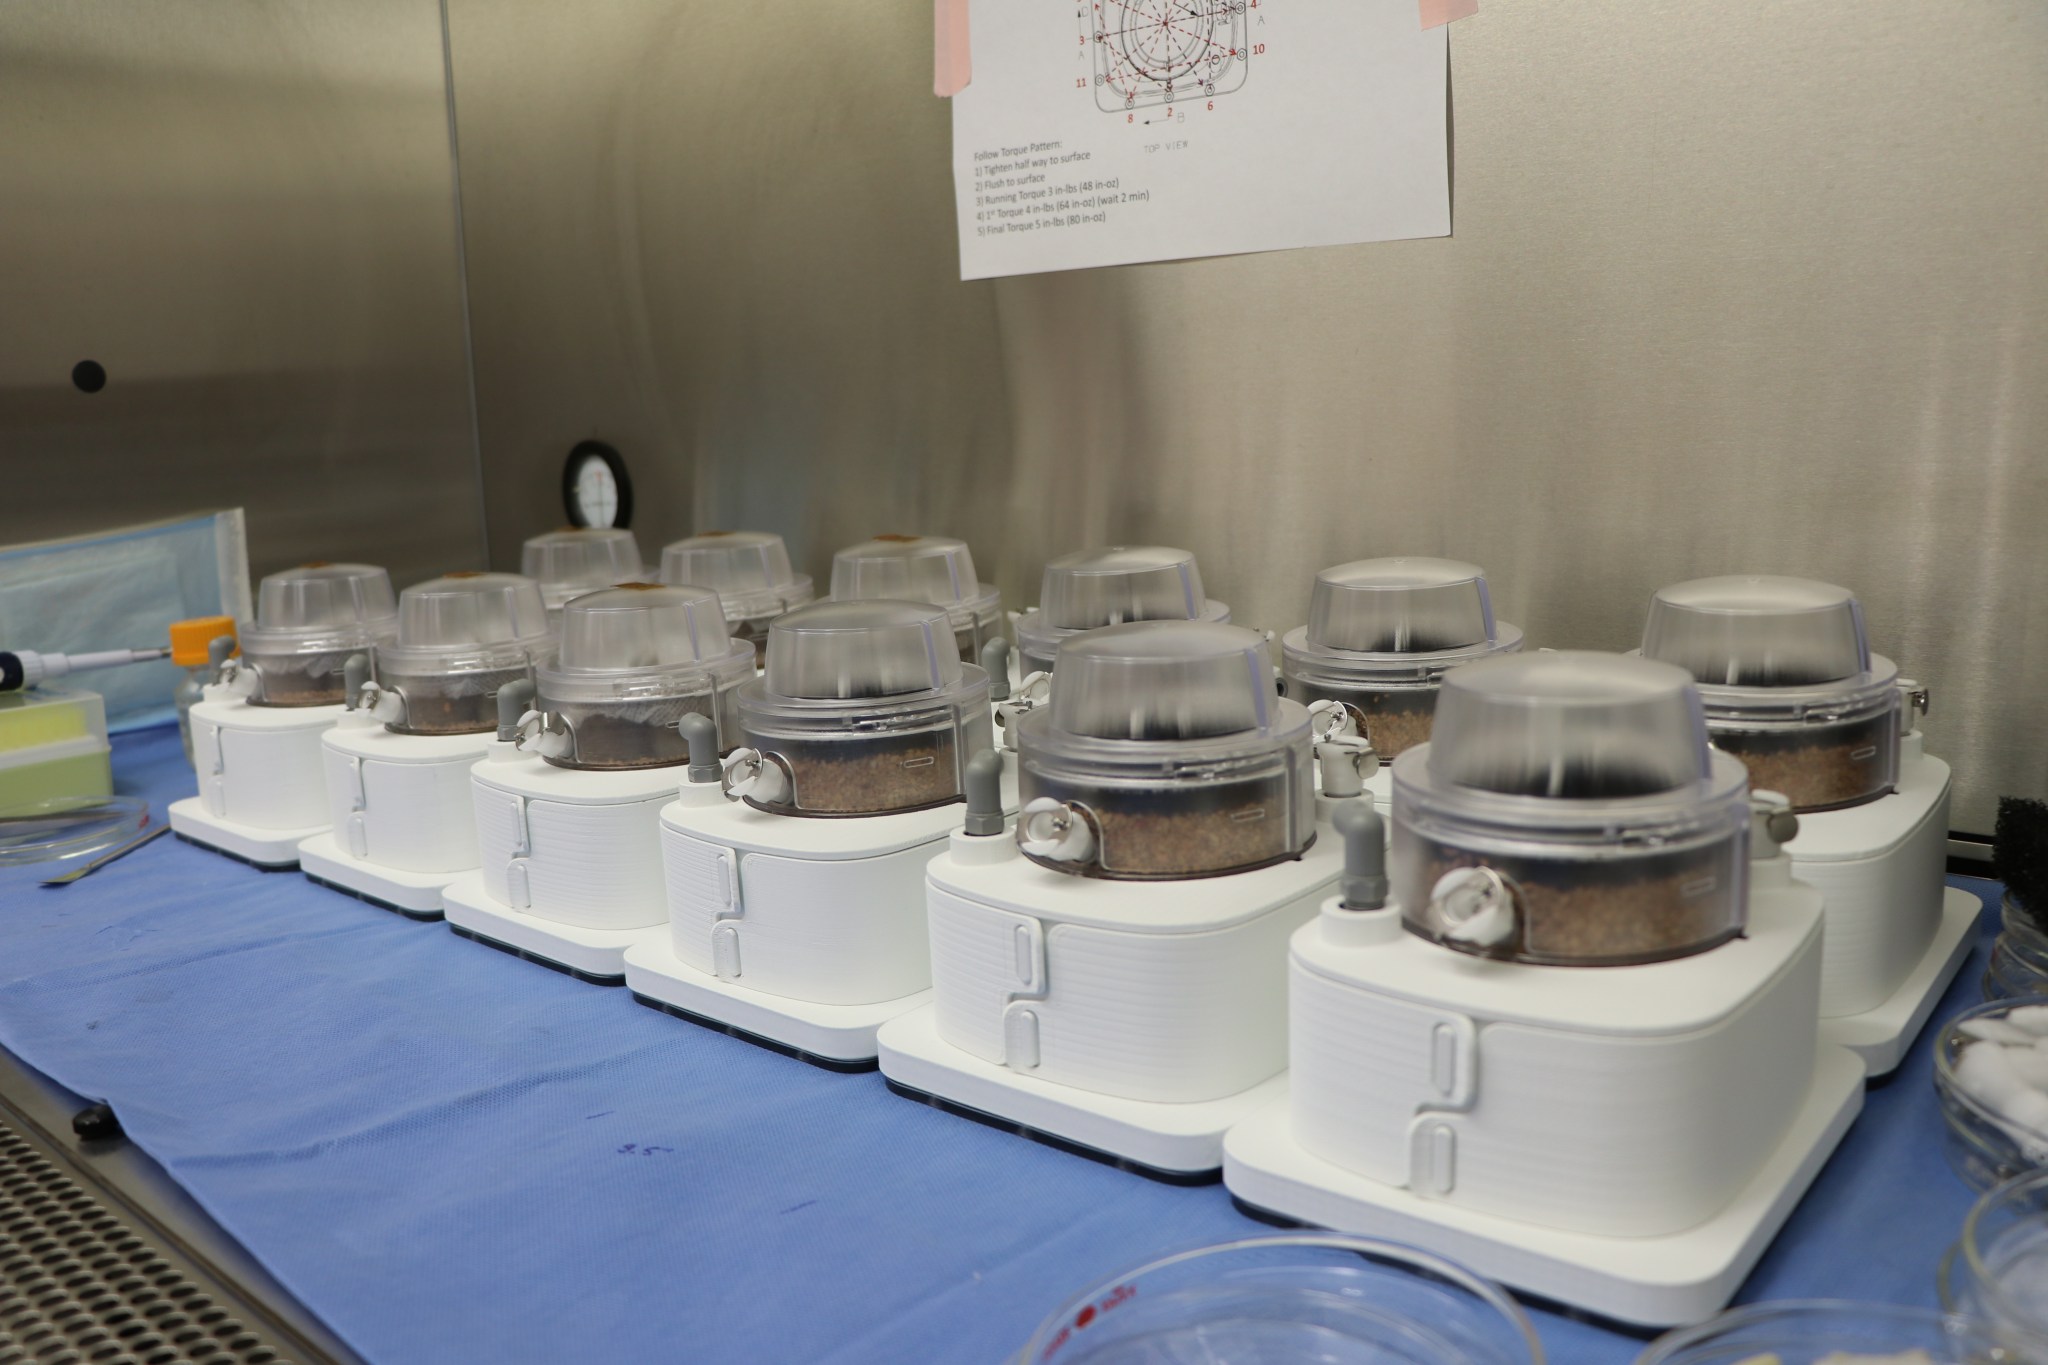 All 12 PONDS units are photographed inside the Space Life Sciences Laboratory at the Kennedy Space Center following assembly.